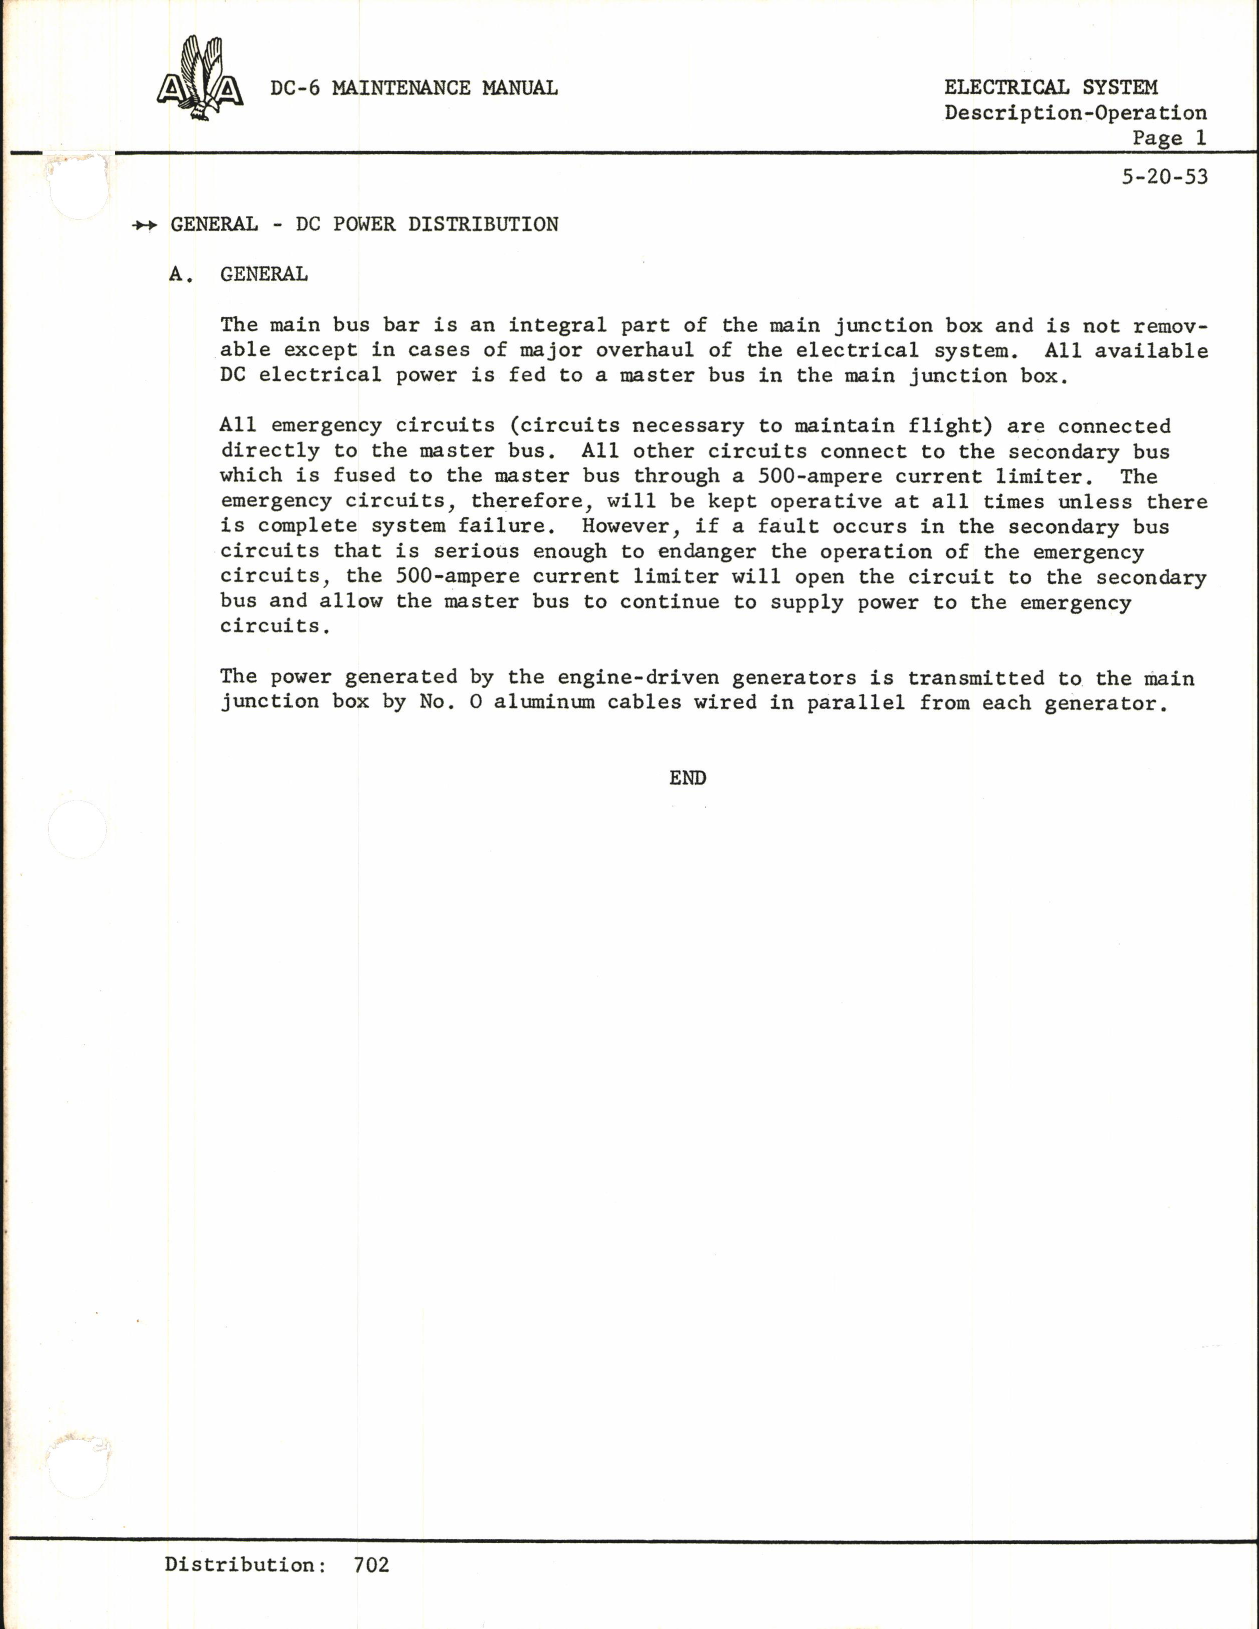 Sample page 5 from AirCorps Library document: DC-6 Maintenance Manual